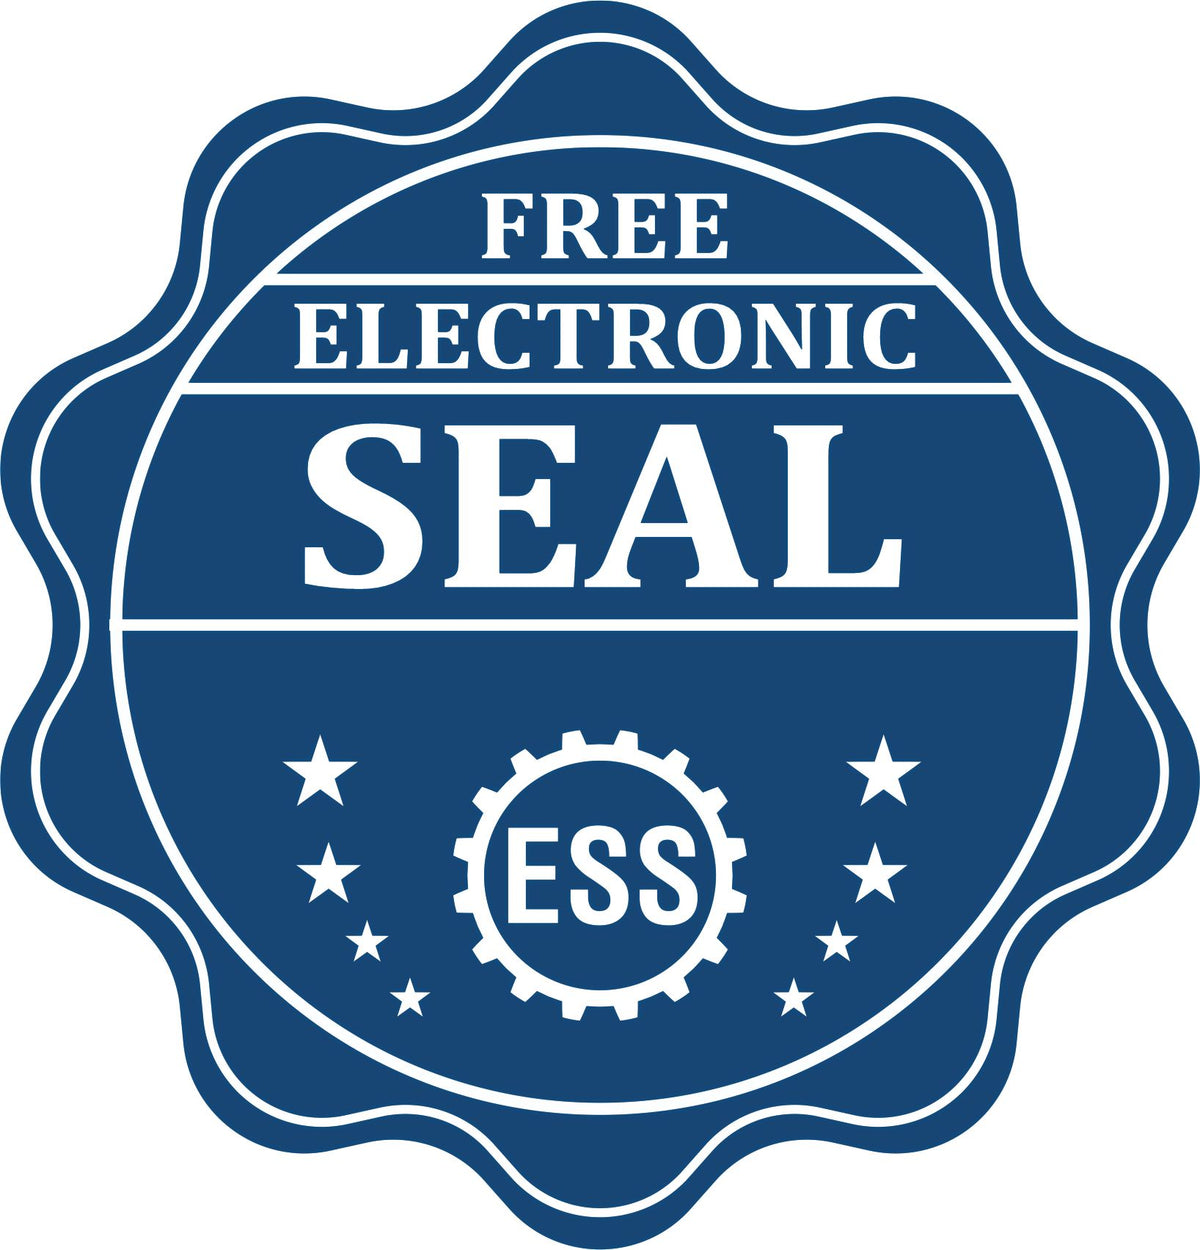 A badge showing a free electronic seal for the Soft Pocket New Hampshire Landscape Architect Embosser with stars and the ESS gear on the emblem.